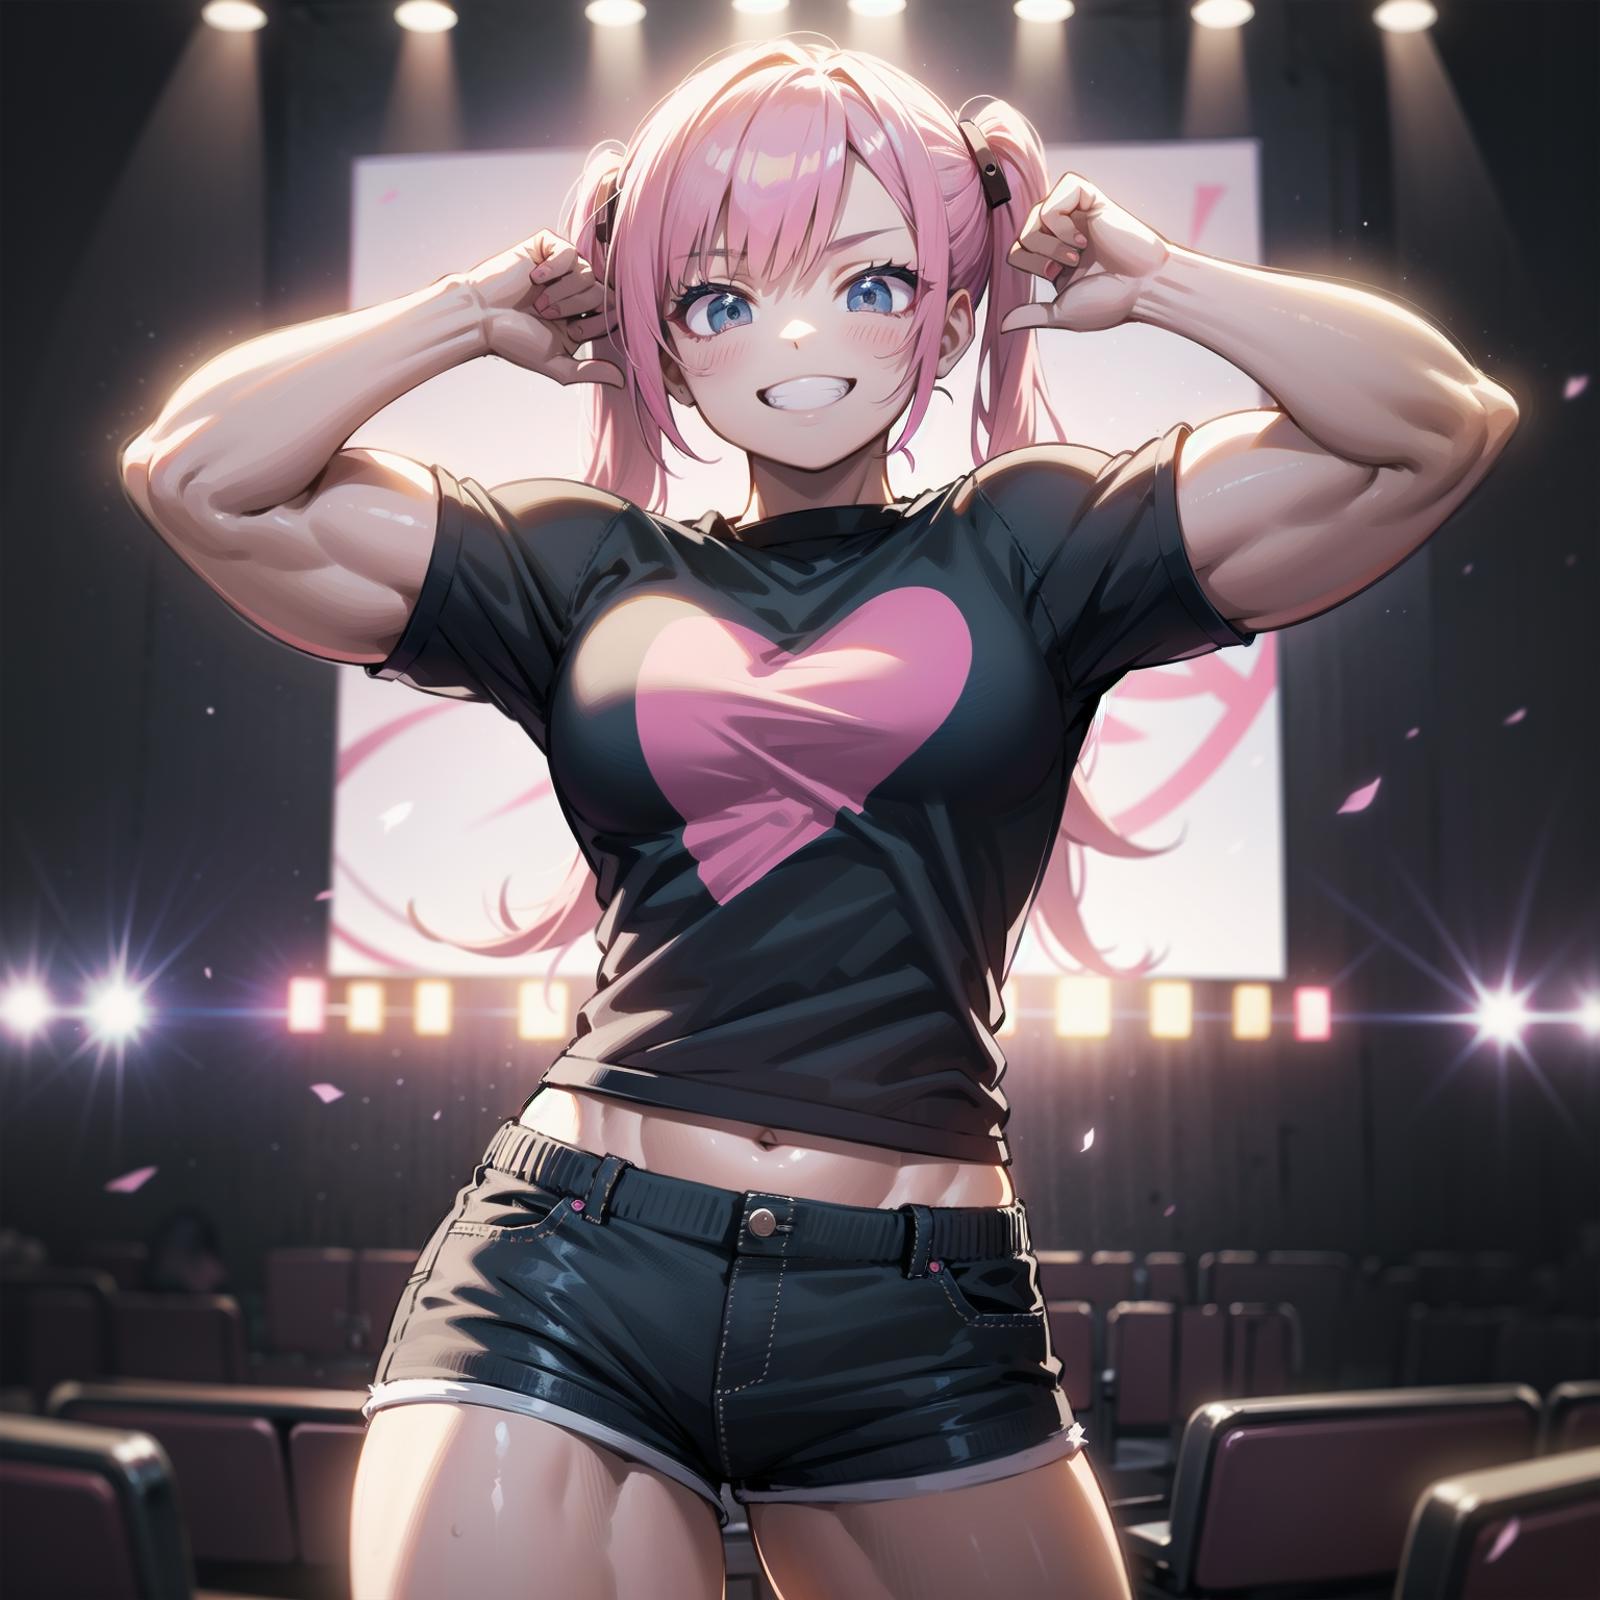 A cartoon drawing of a woman wearing a black shirt and black shorts, flexing her muscles and showing off her heart shirt.